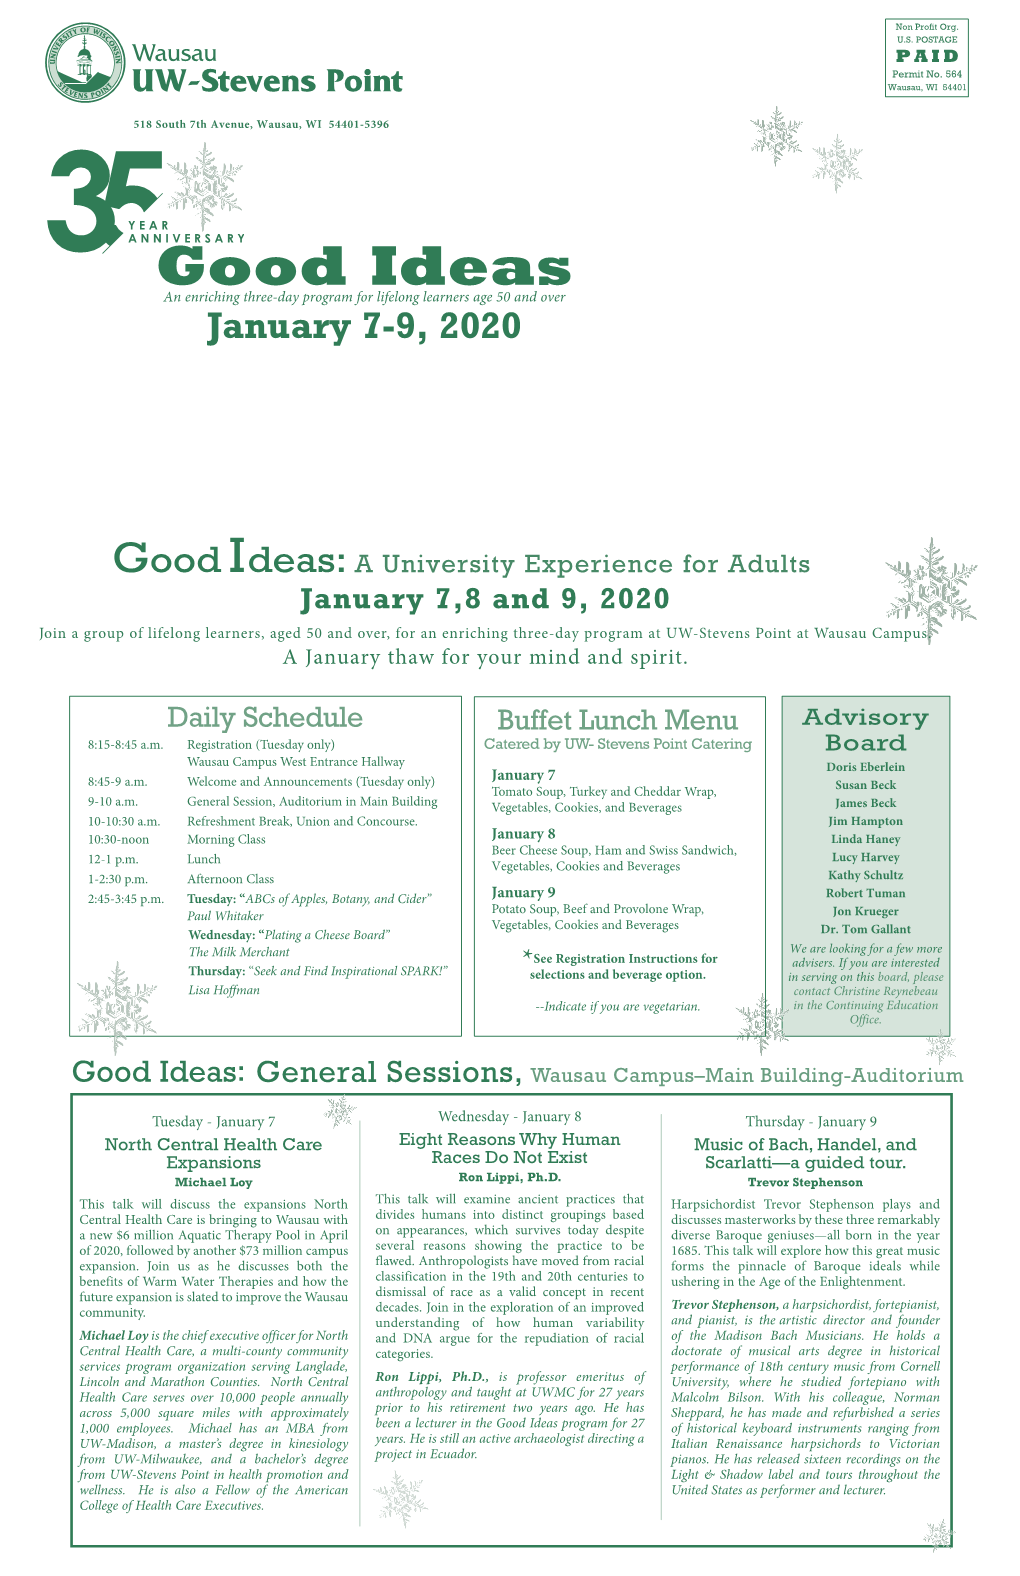 Good Ideas an Enriching Three-Day Program for Lifelong Learners Age 50 and Over January 7-9, 2020